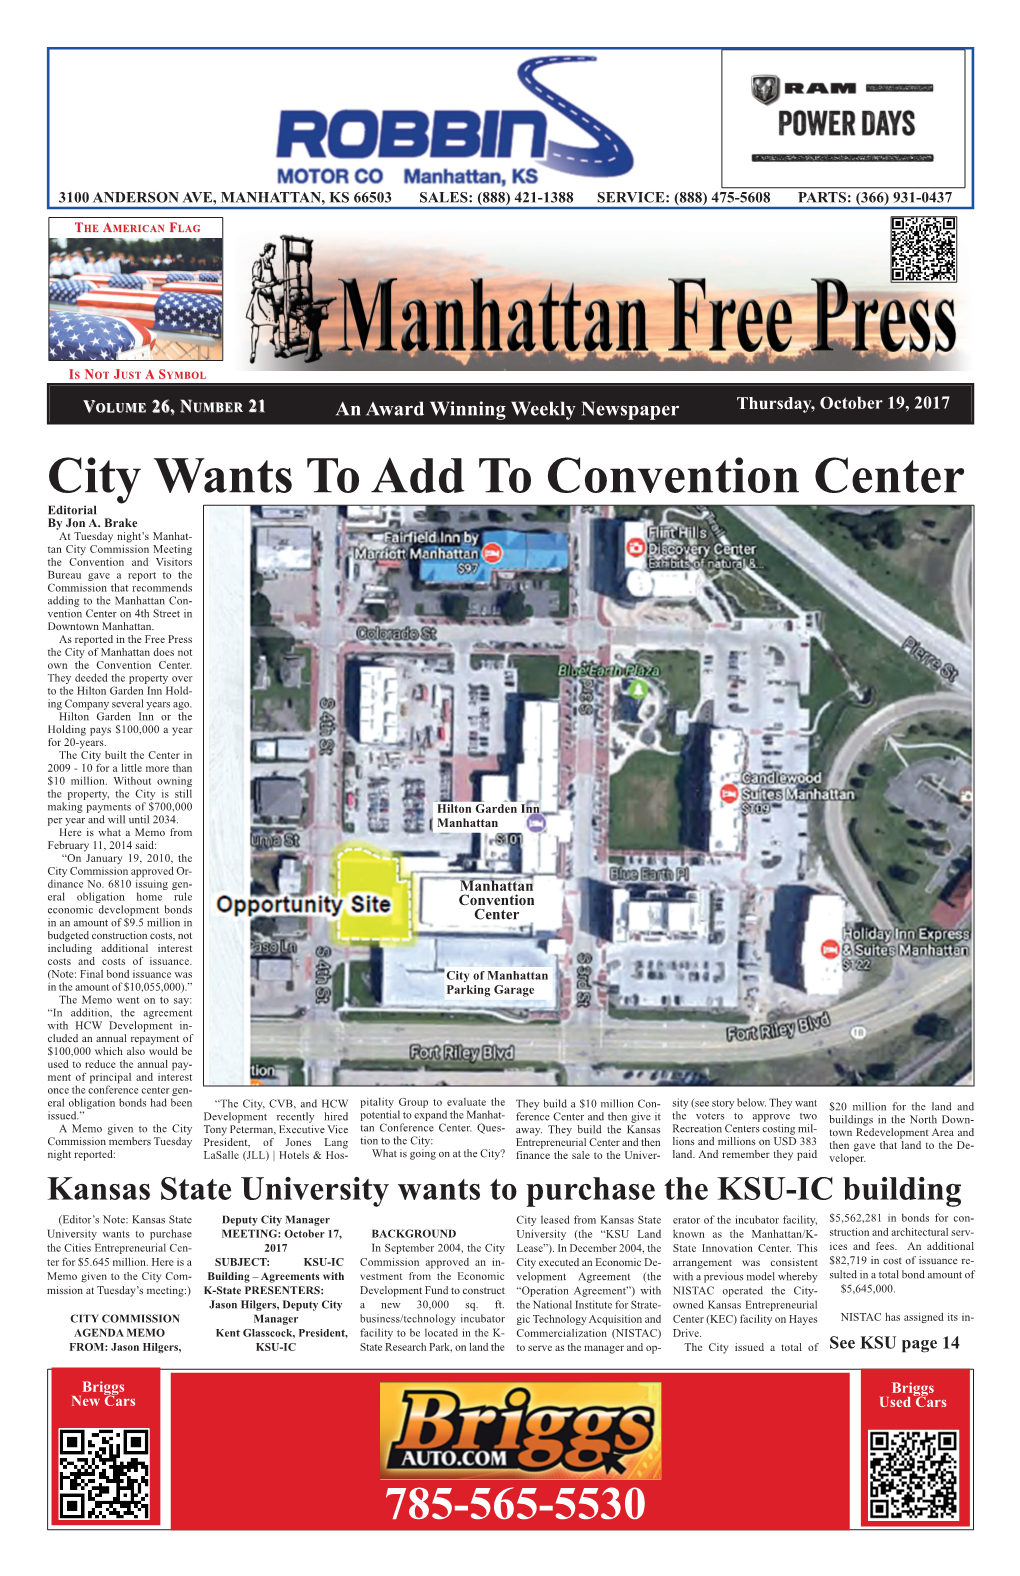 City Wants to Add to Convention Center Editorial by Jon A